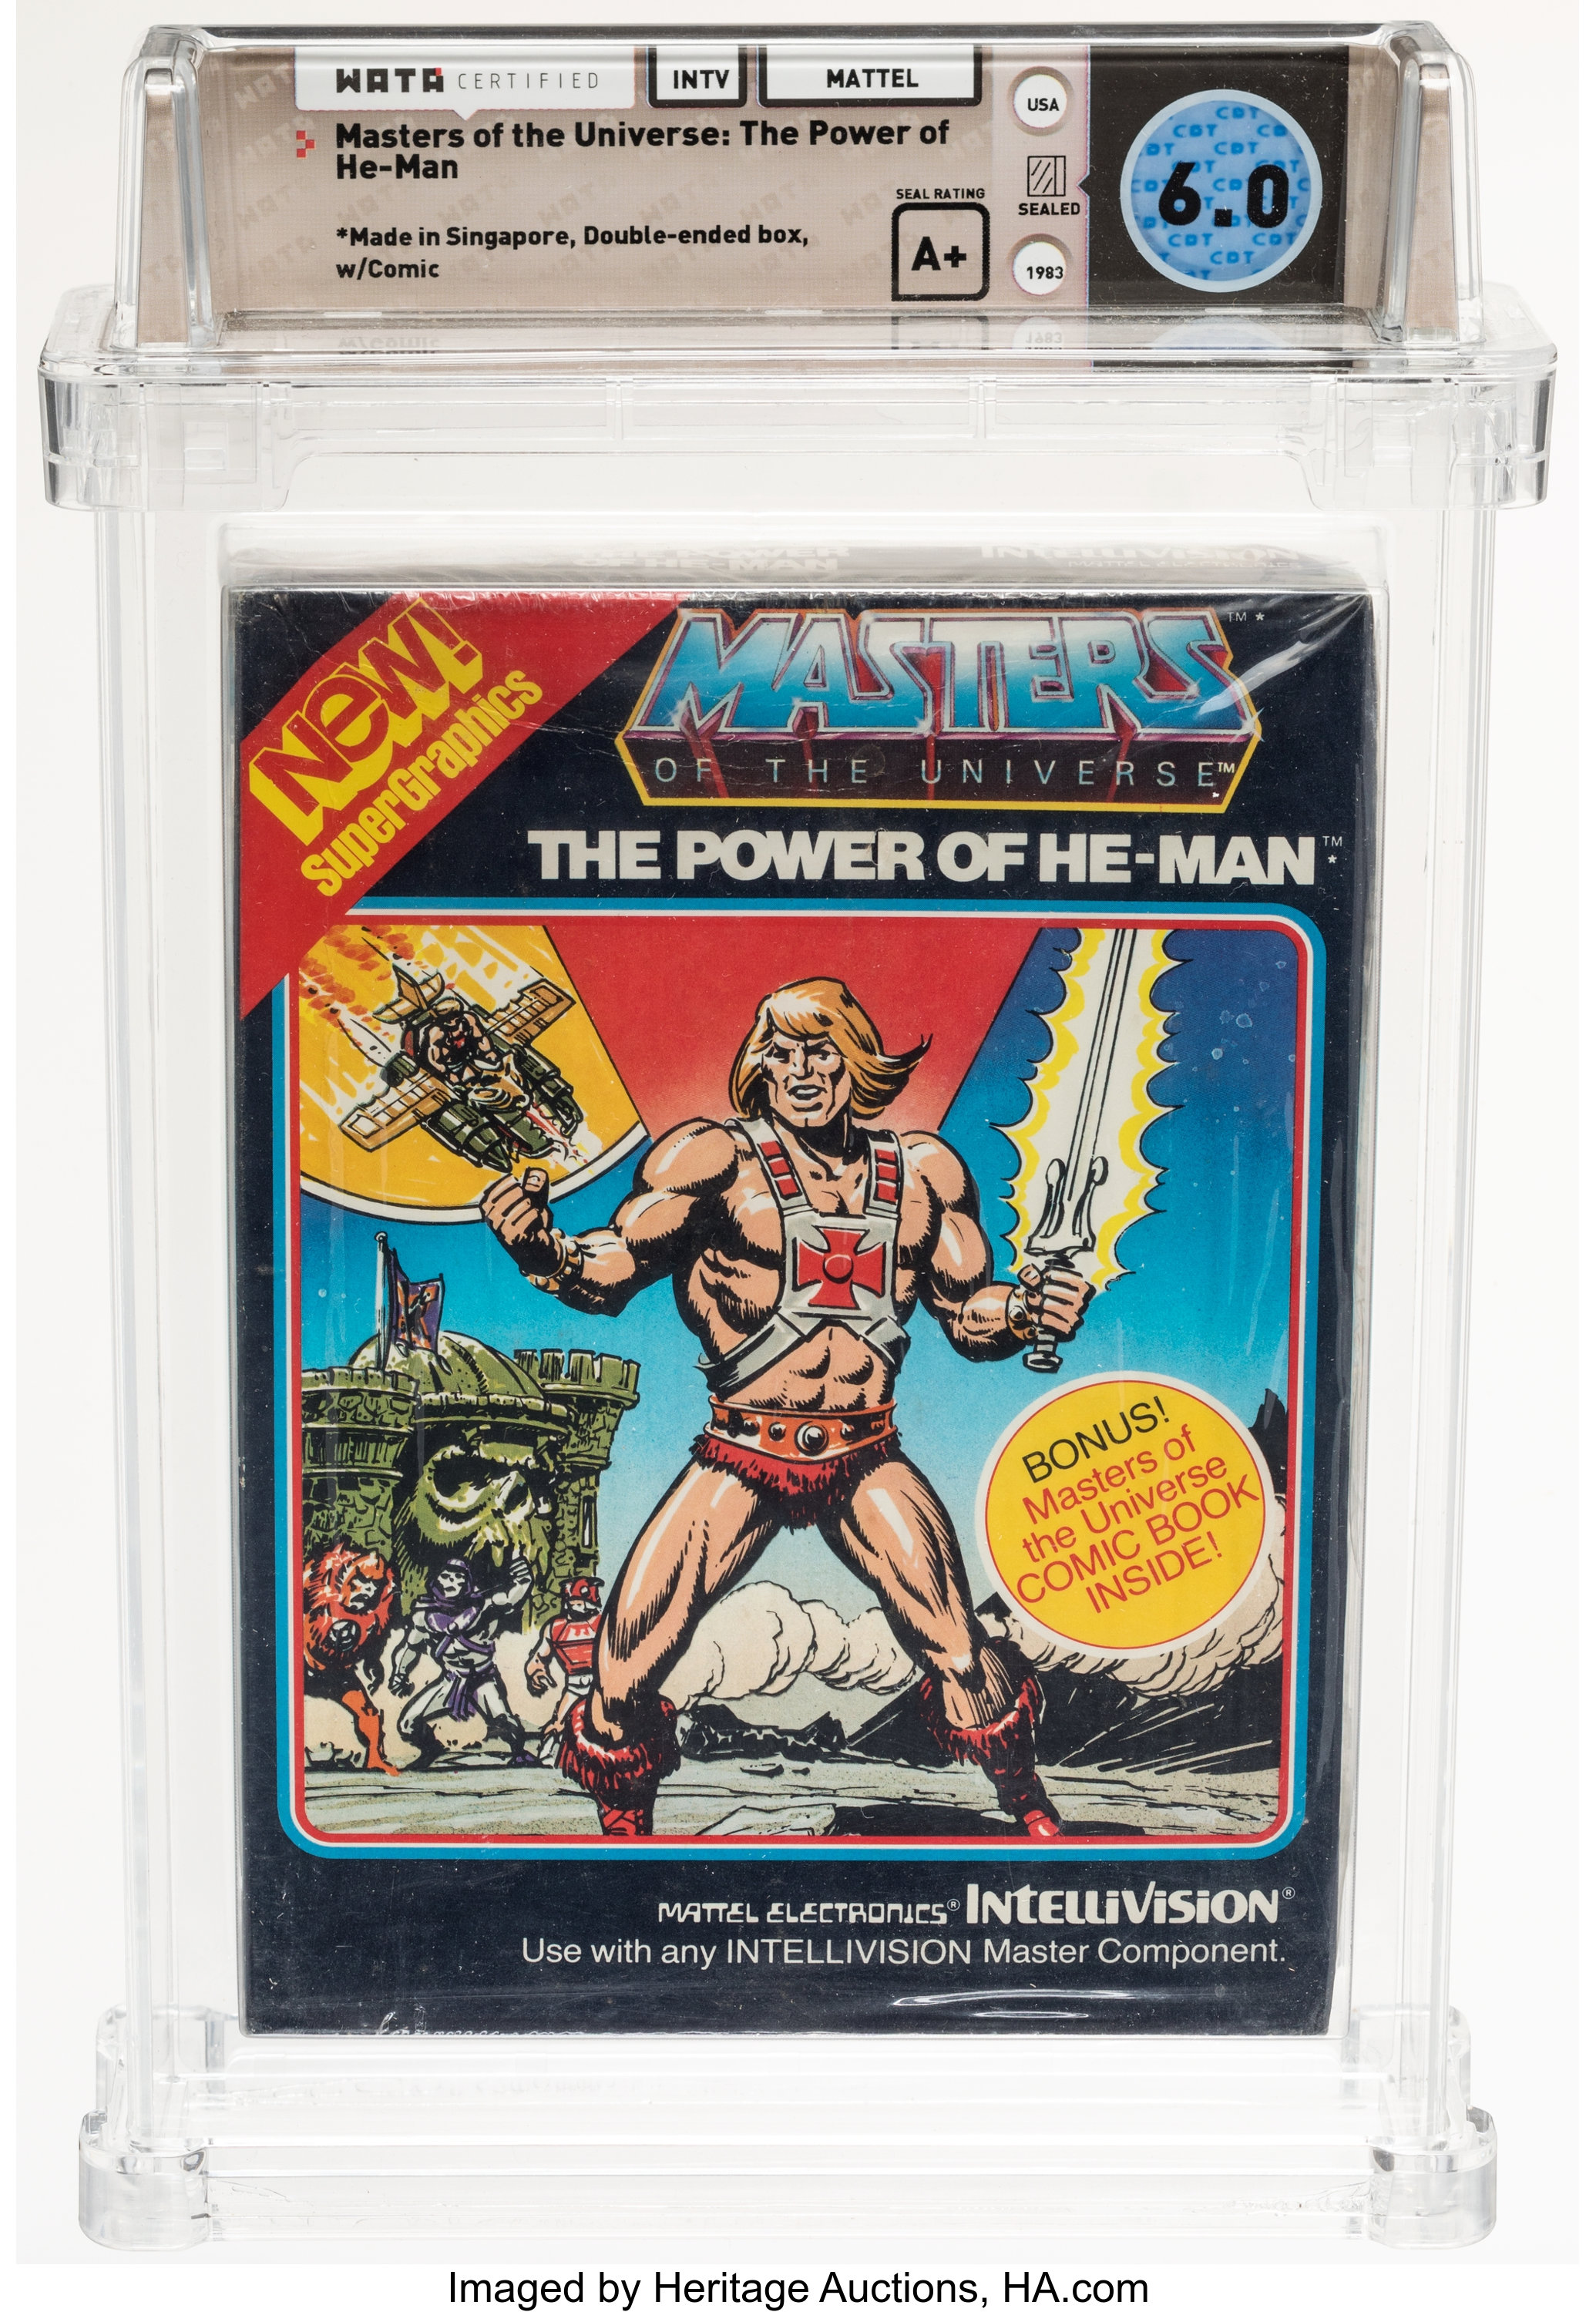 Masters of the Universe: The Power of He-Man - Wata  A+ Sealed, | Lot  #17782 | Heritage Auctions